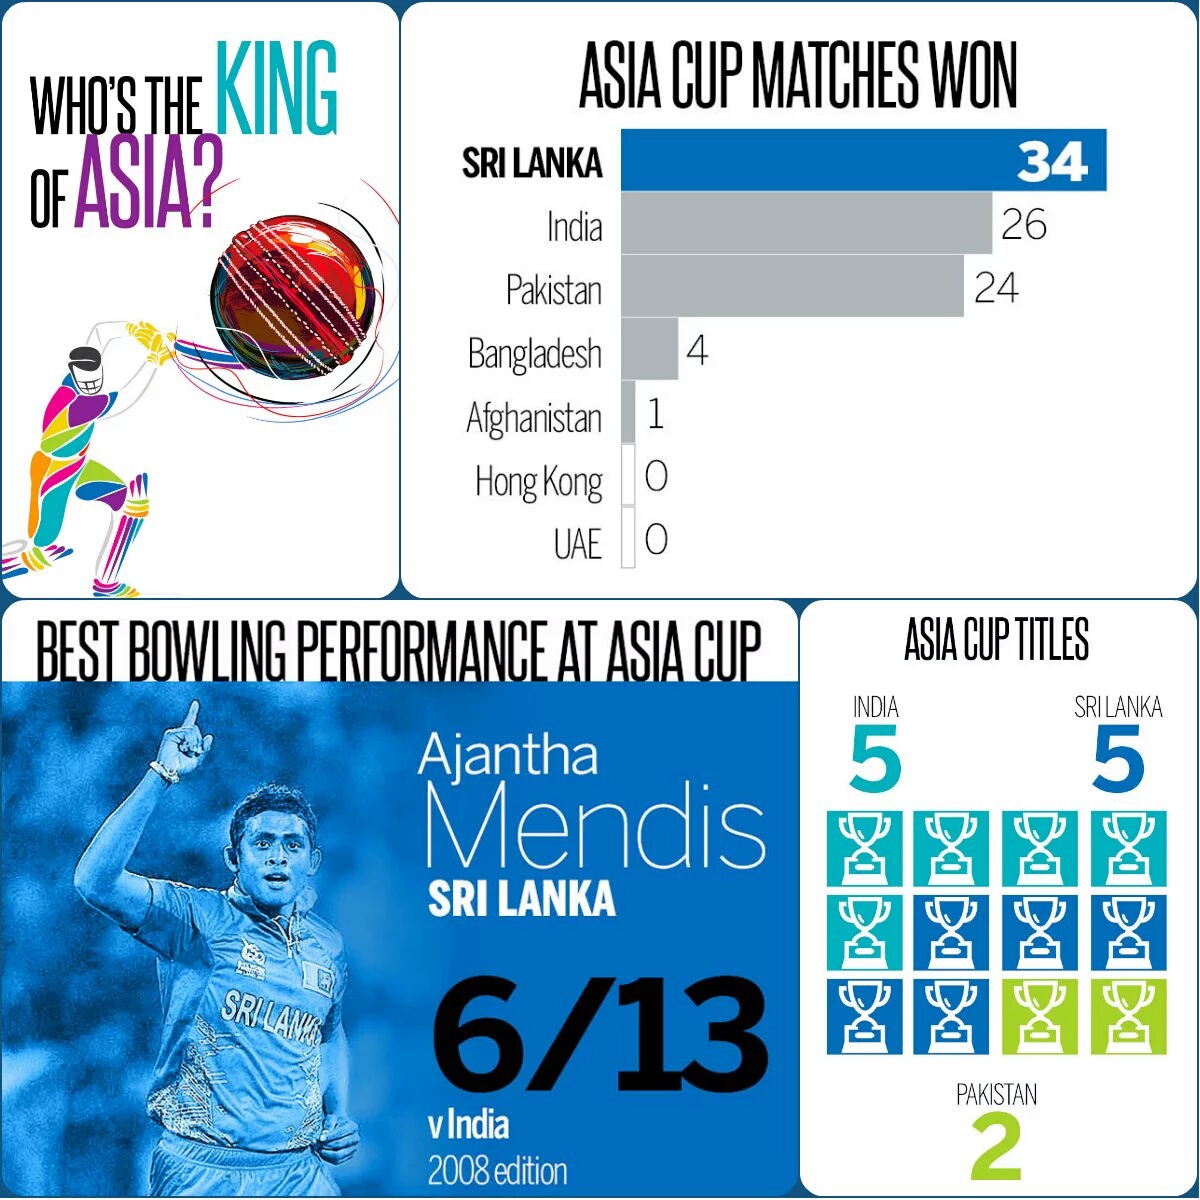 Who is the cricket king of Asia